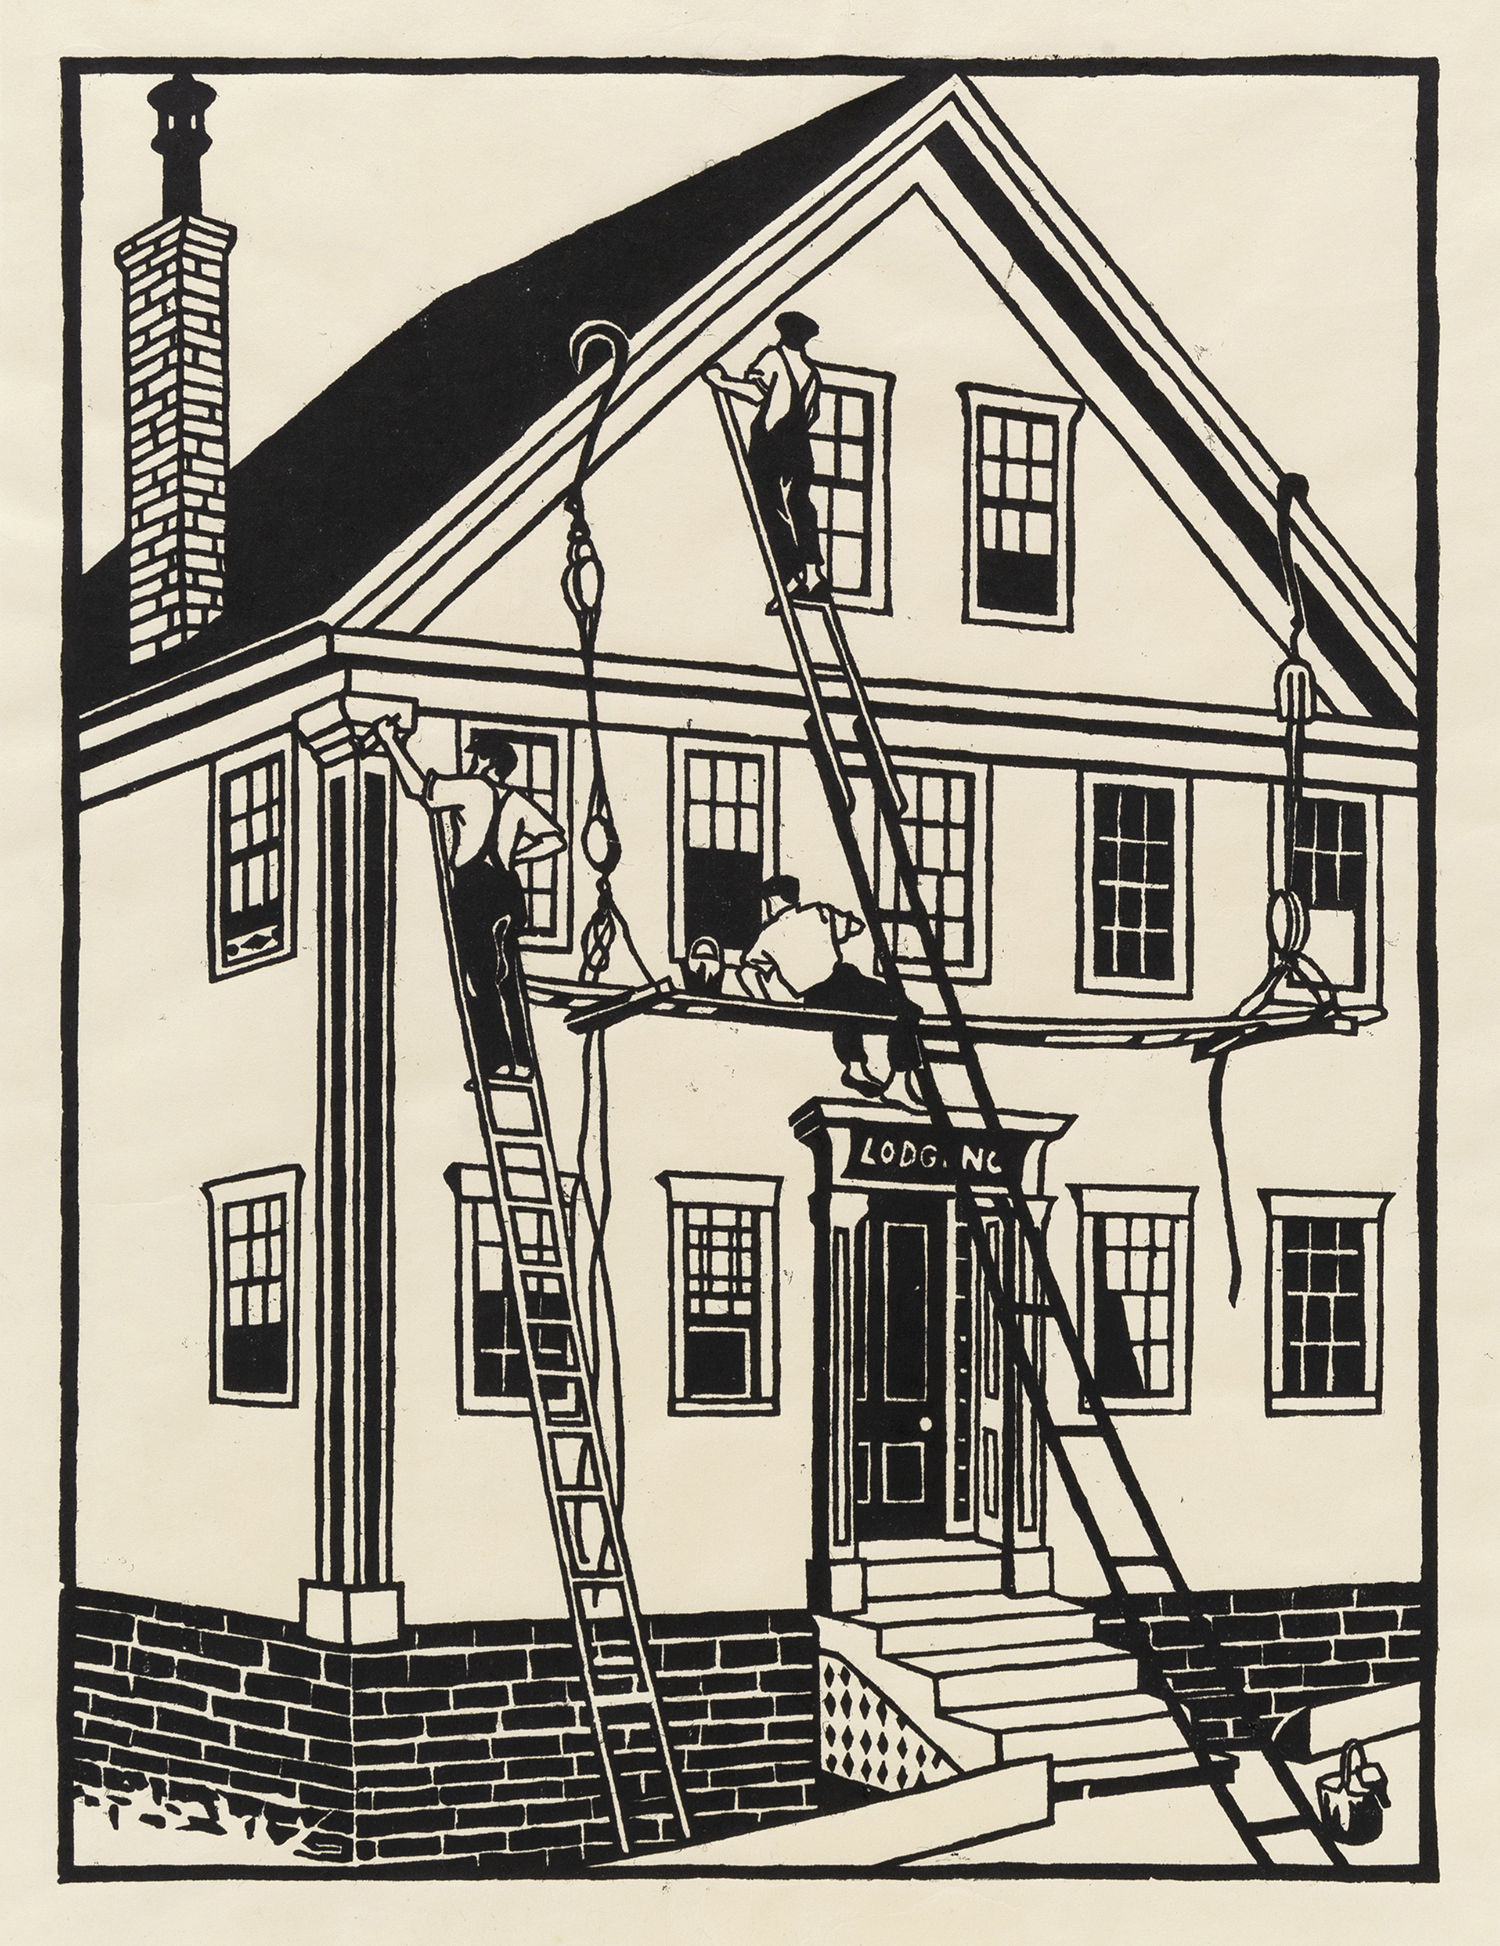 Lodging, 1915-17, Woodcut, 15 x 11 1/4 inches (38.1 x 28.6 cm), Edition of 10